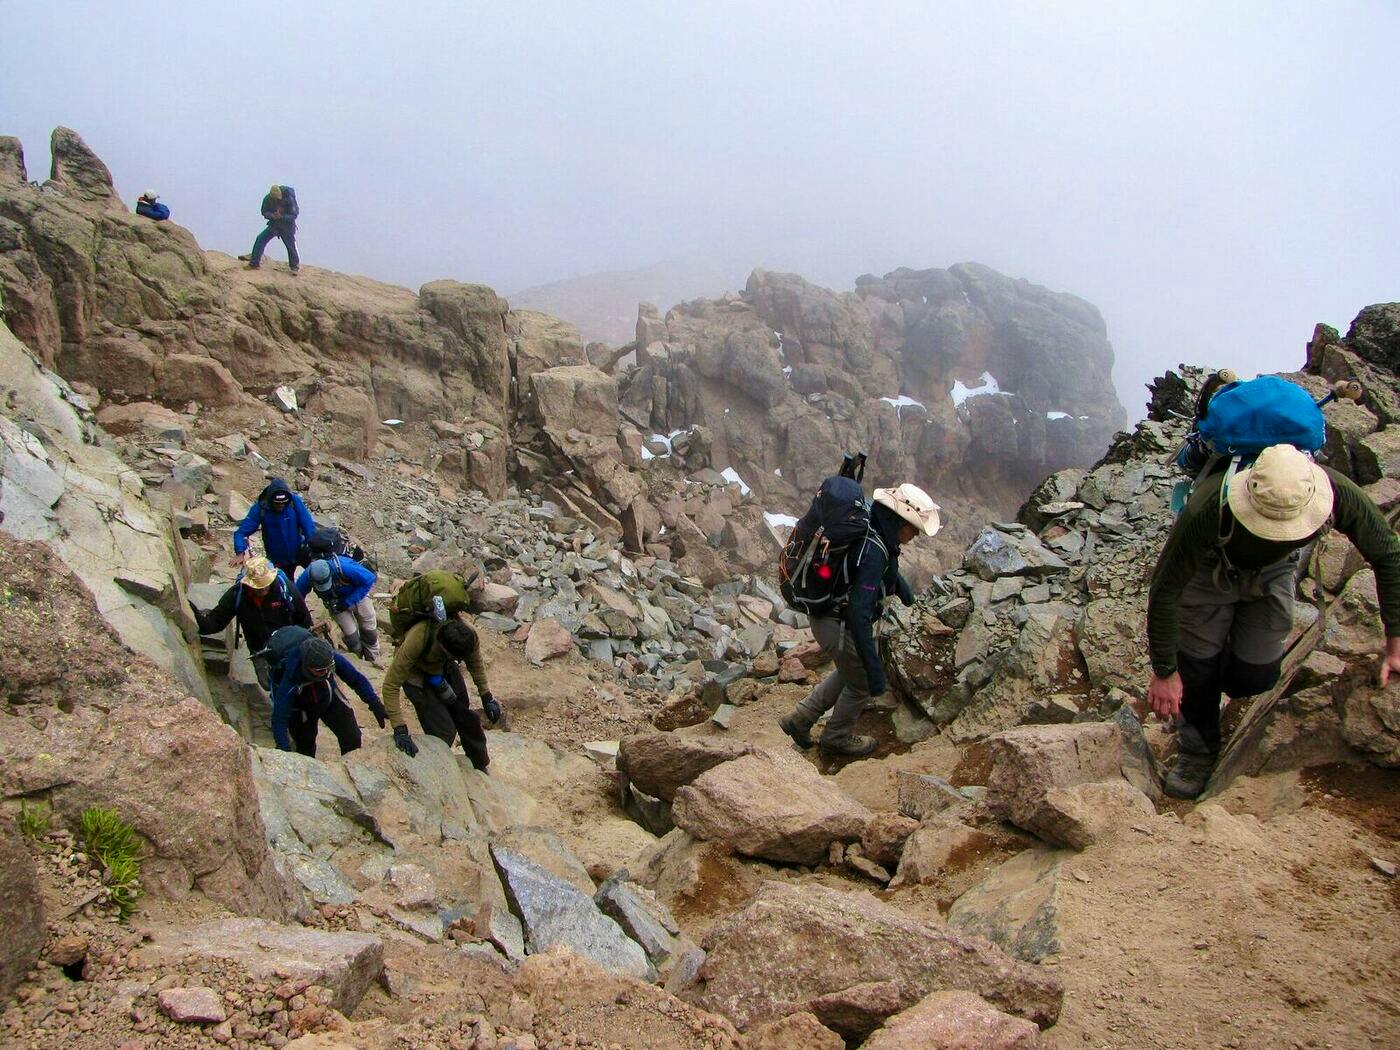 hiking in cloudy weather on mt kenya